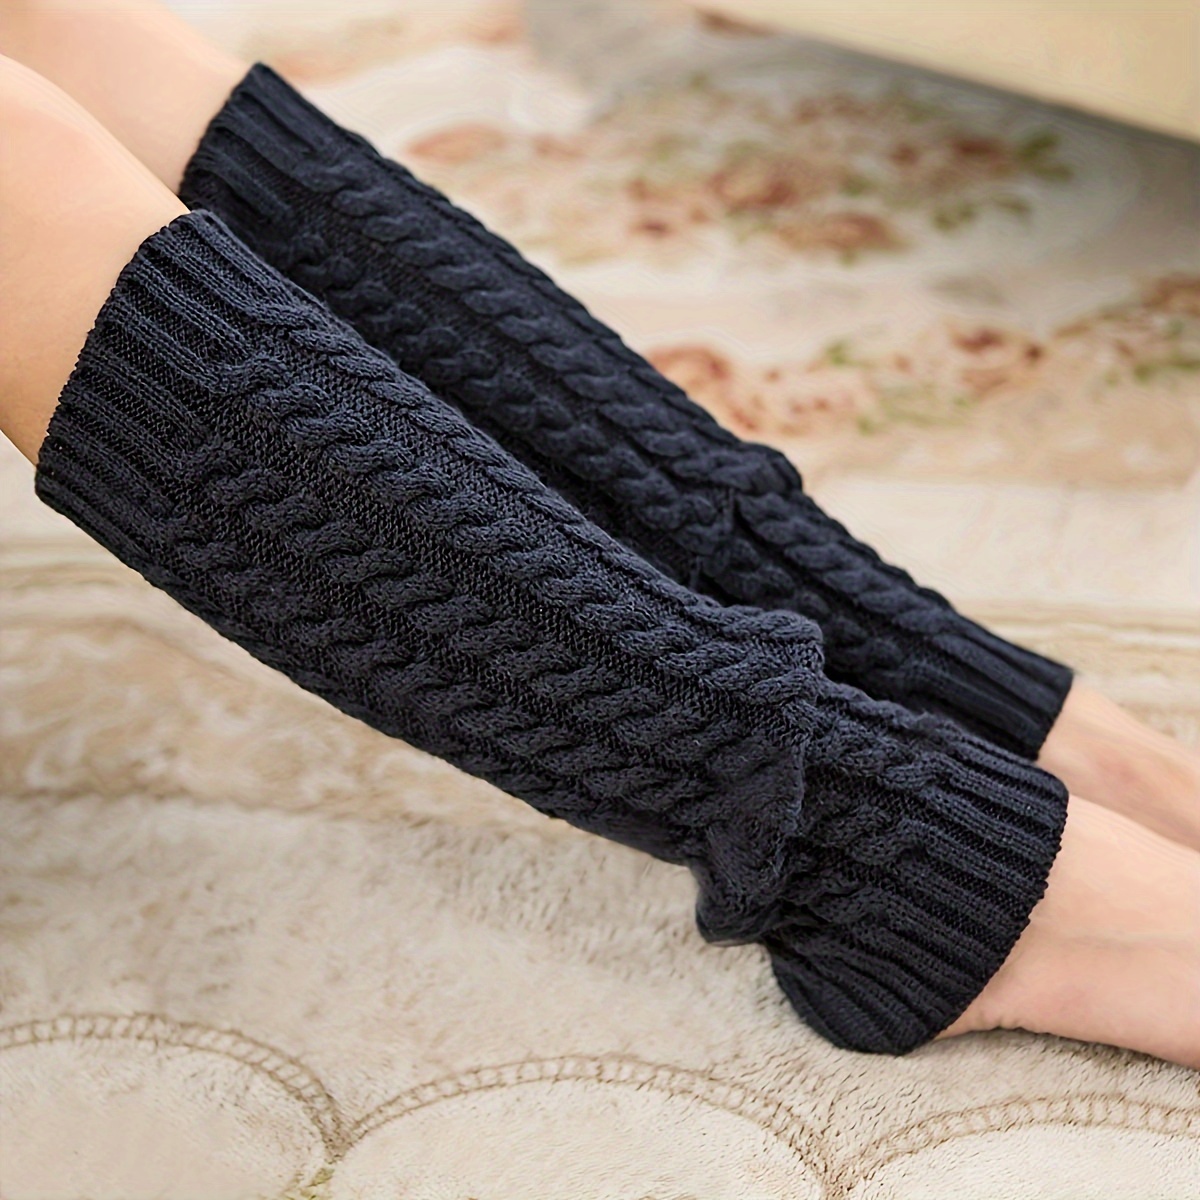 Knitted Wool Crochet Over Knee High Twist Flared Knit Leg Warmers For Women  Fashionable Winter Stockings With From Nbkingstar, $52.98